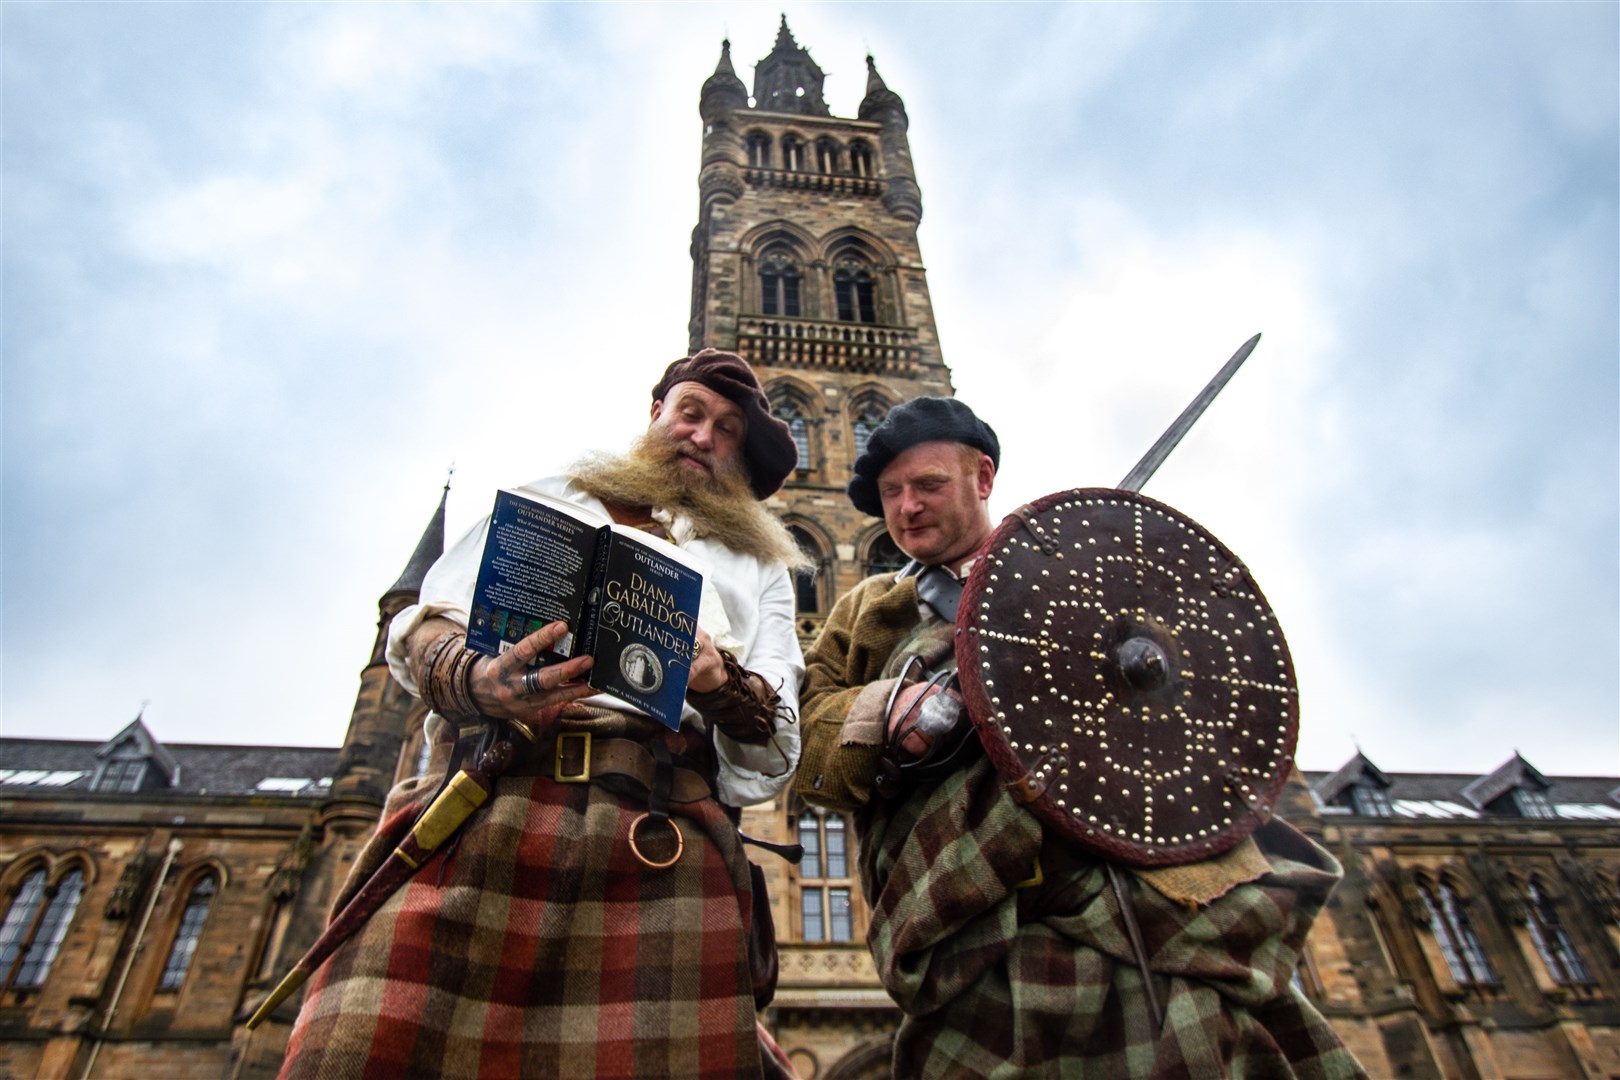 Charlie Allan and Scott McMaster of The Clanranald Trust for Scotland help to launch the Outlander Conference 2020 announcement at the University of Glasgow. Charlie is a fight choreographer and has appeared in the series.